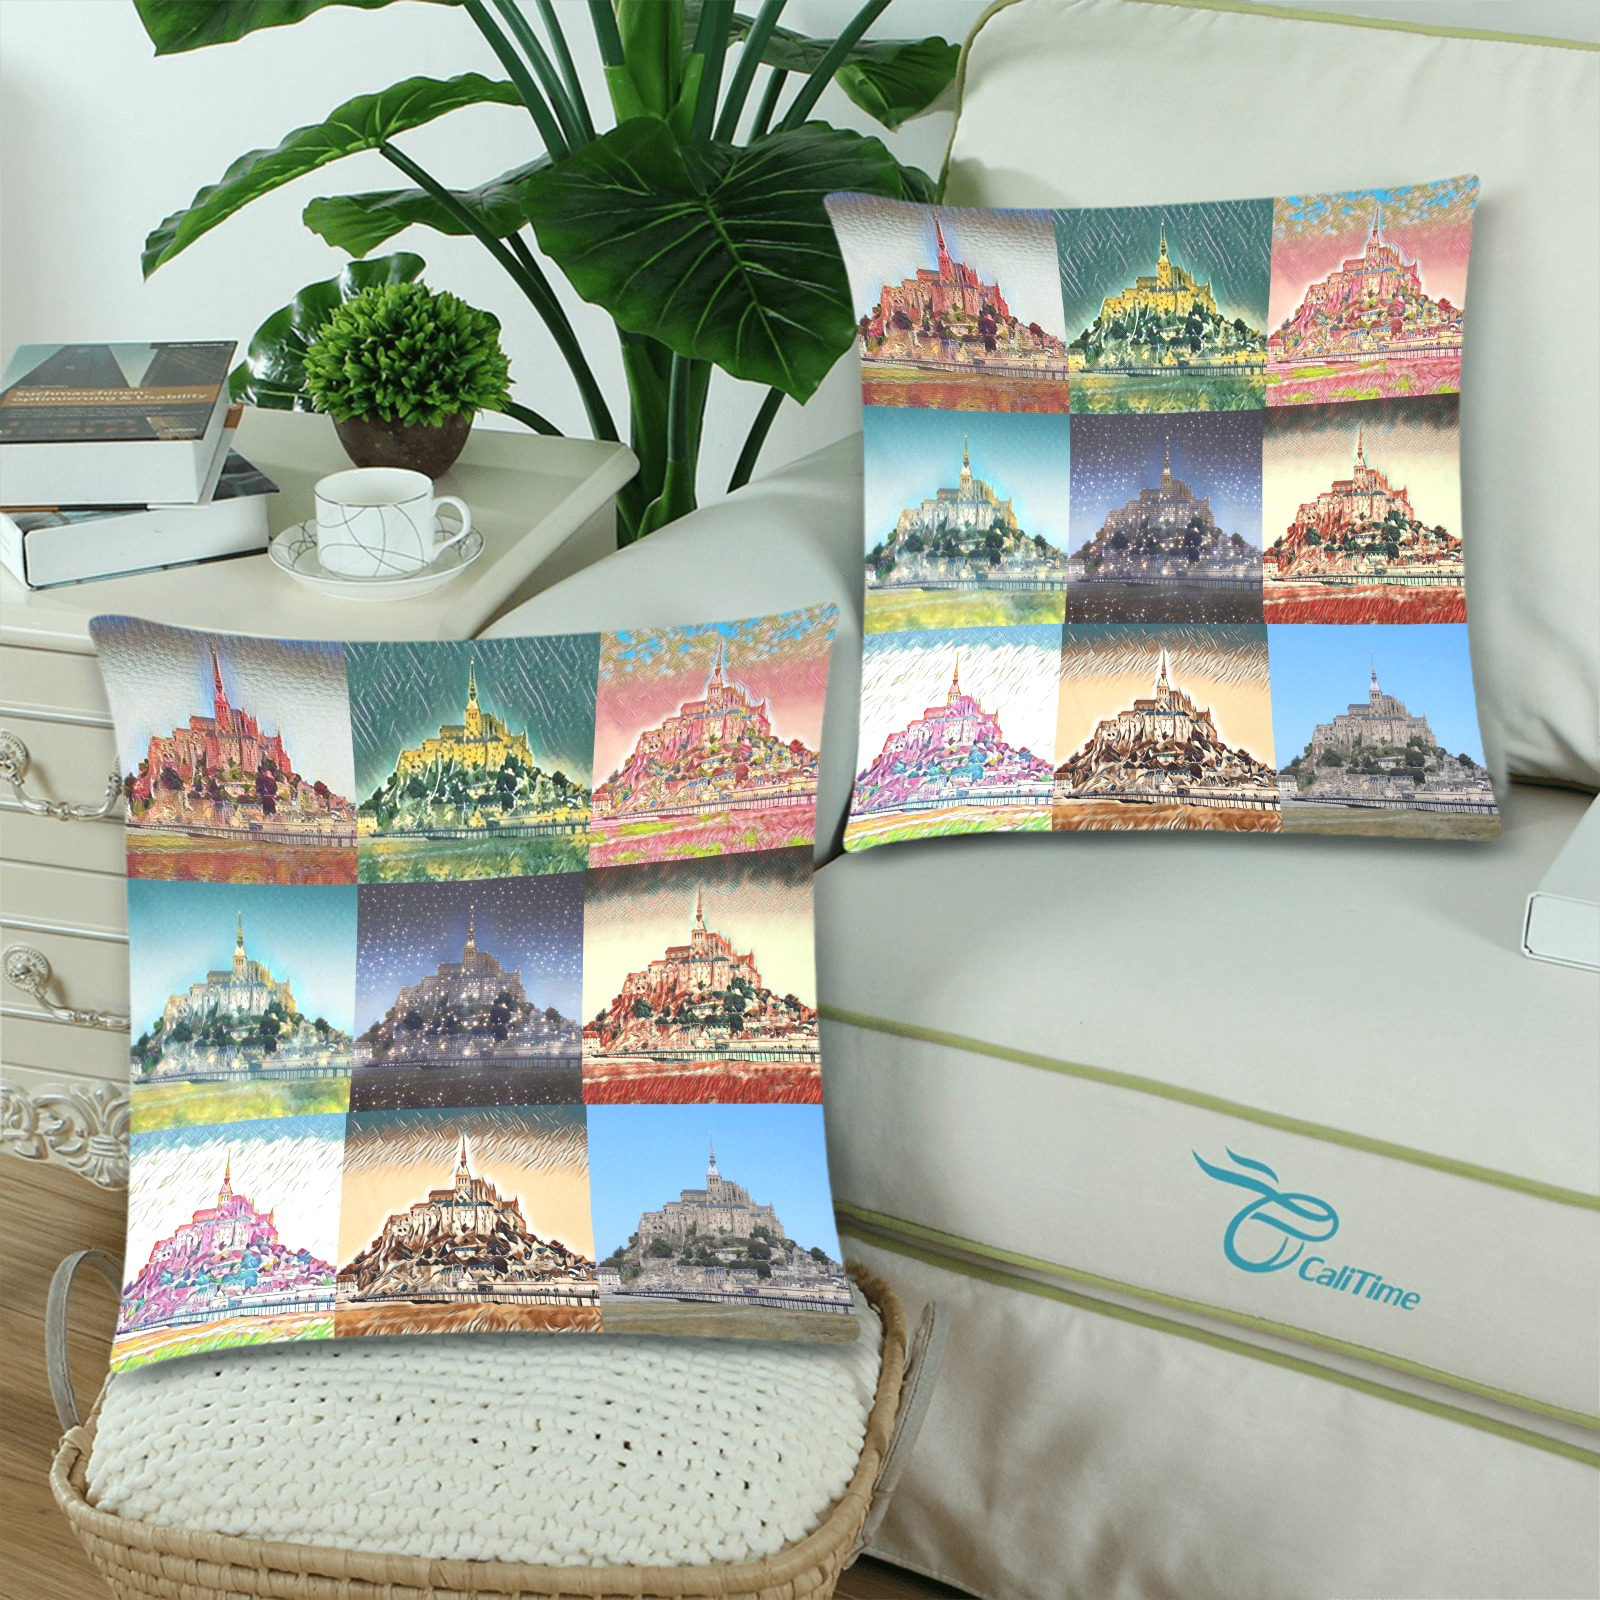 Mont Saint Michel, Normandy, France Collage Custom Zippered Pillow Cases 18"x 18" (Twin Sides) (Set of 2)